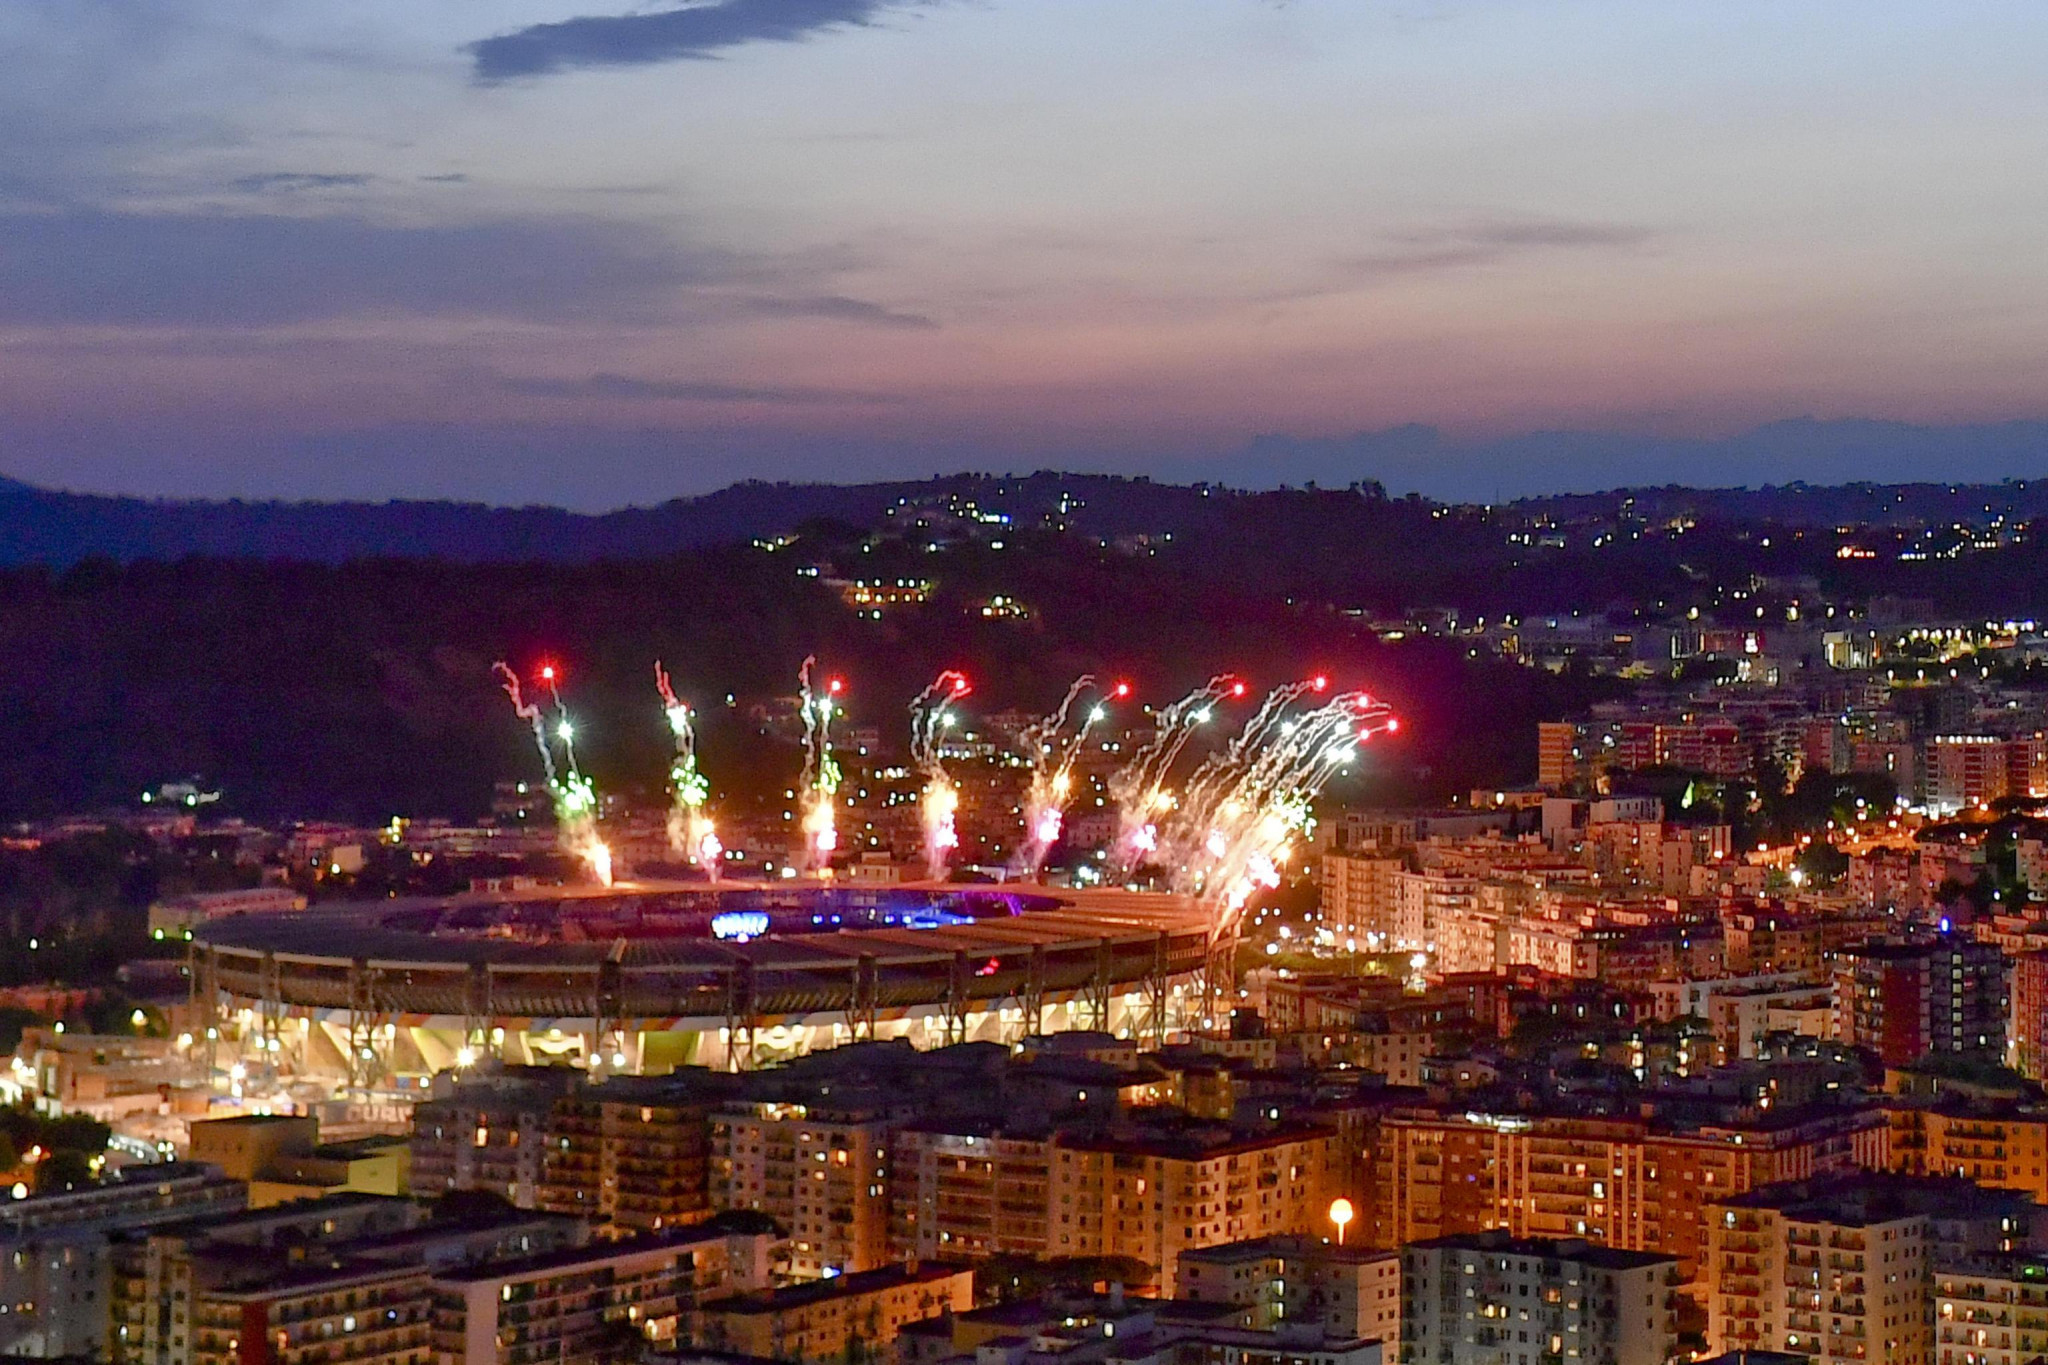 insidethegames is reporting LIVE from the Summer Universiade in Naples